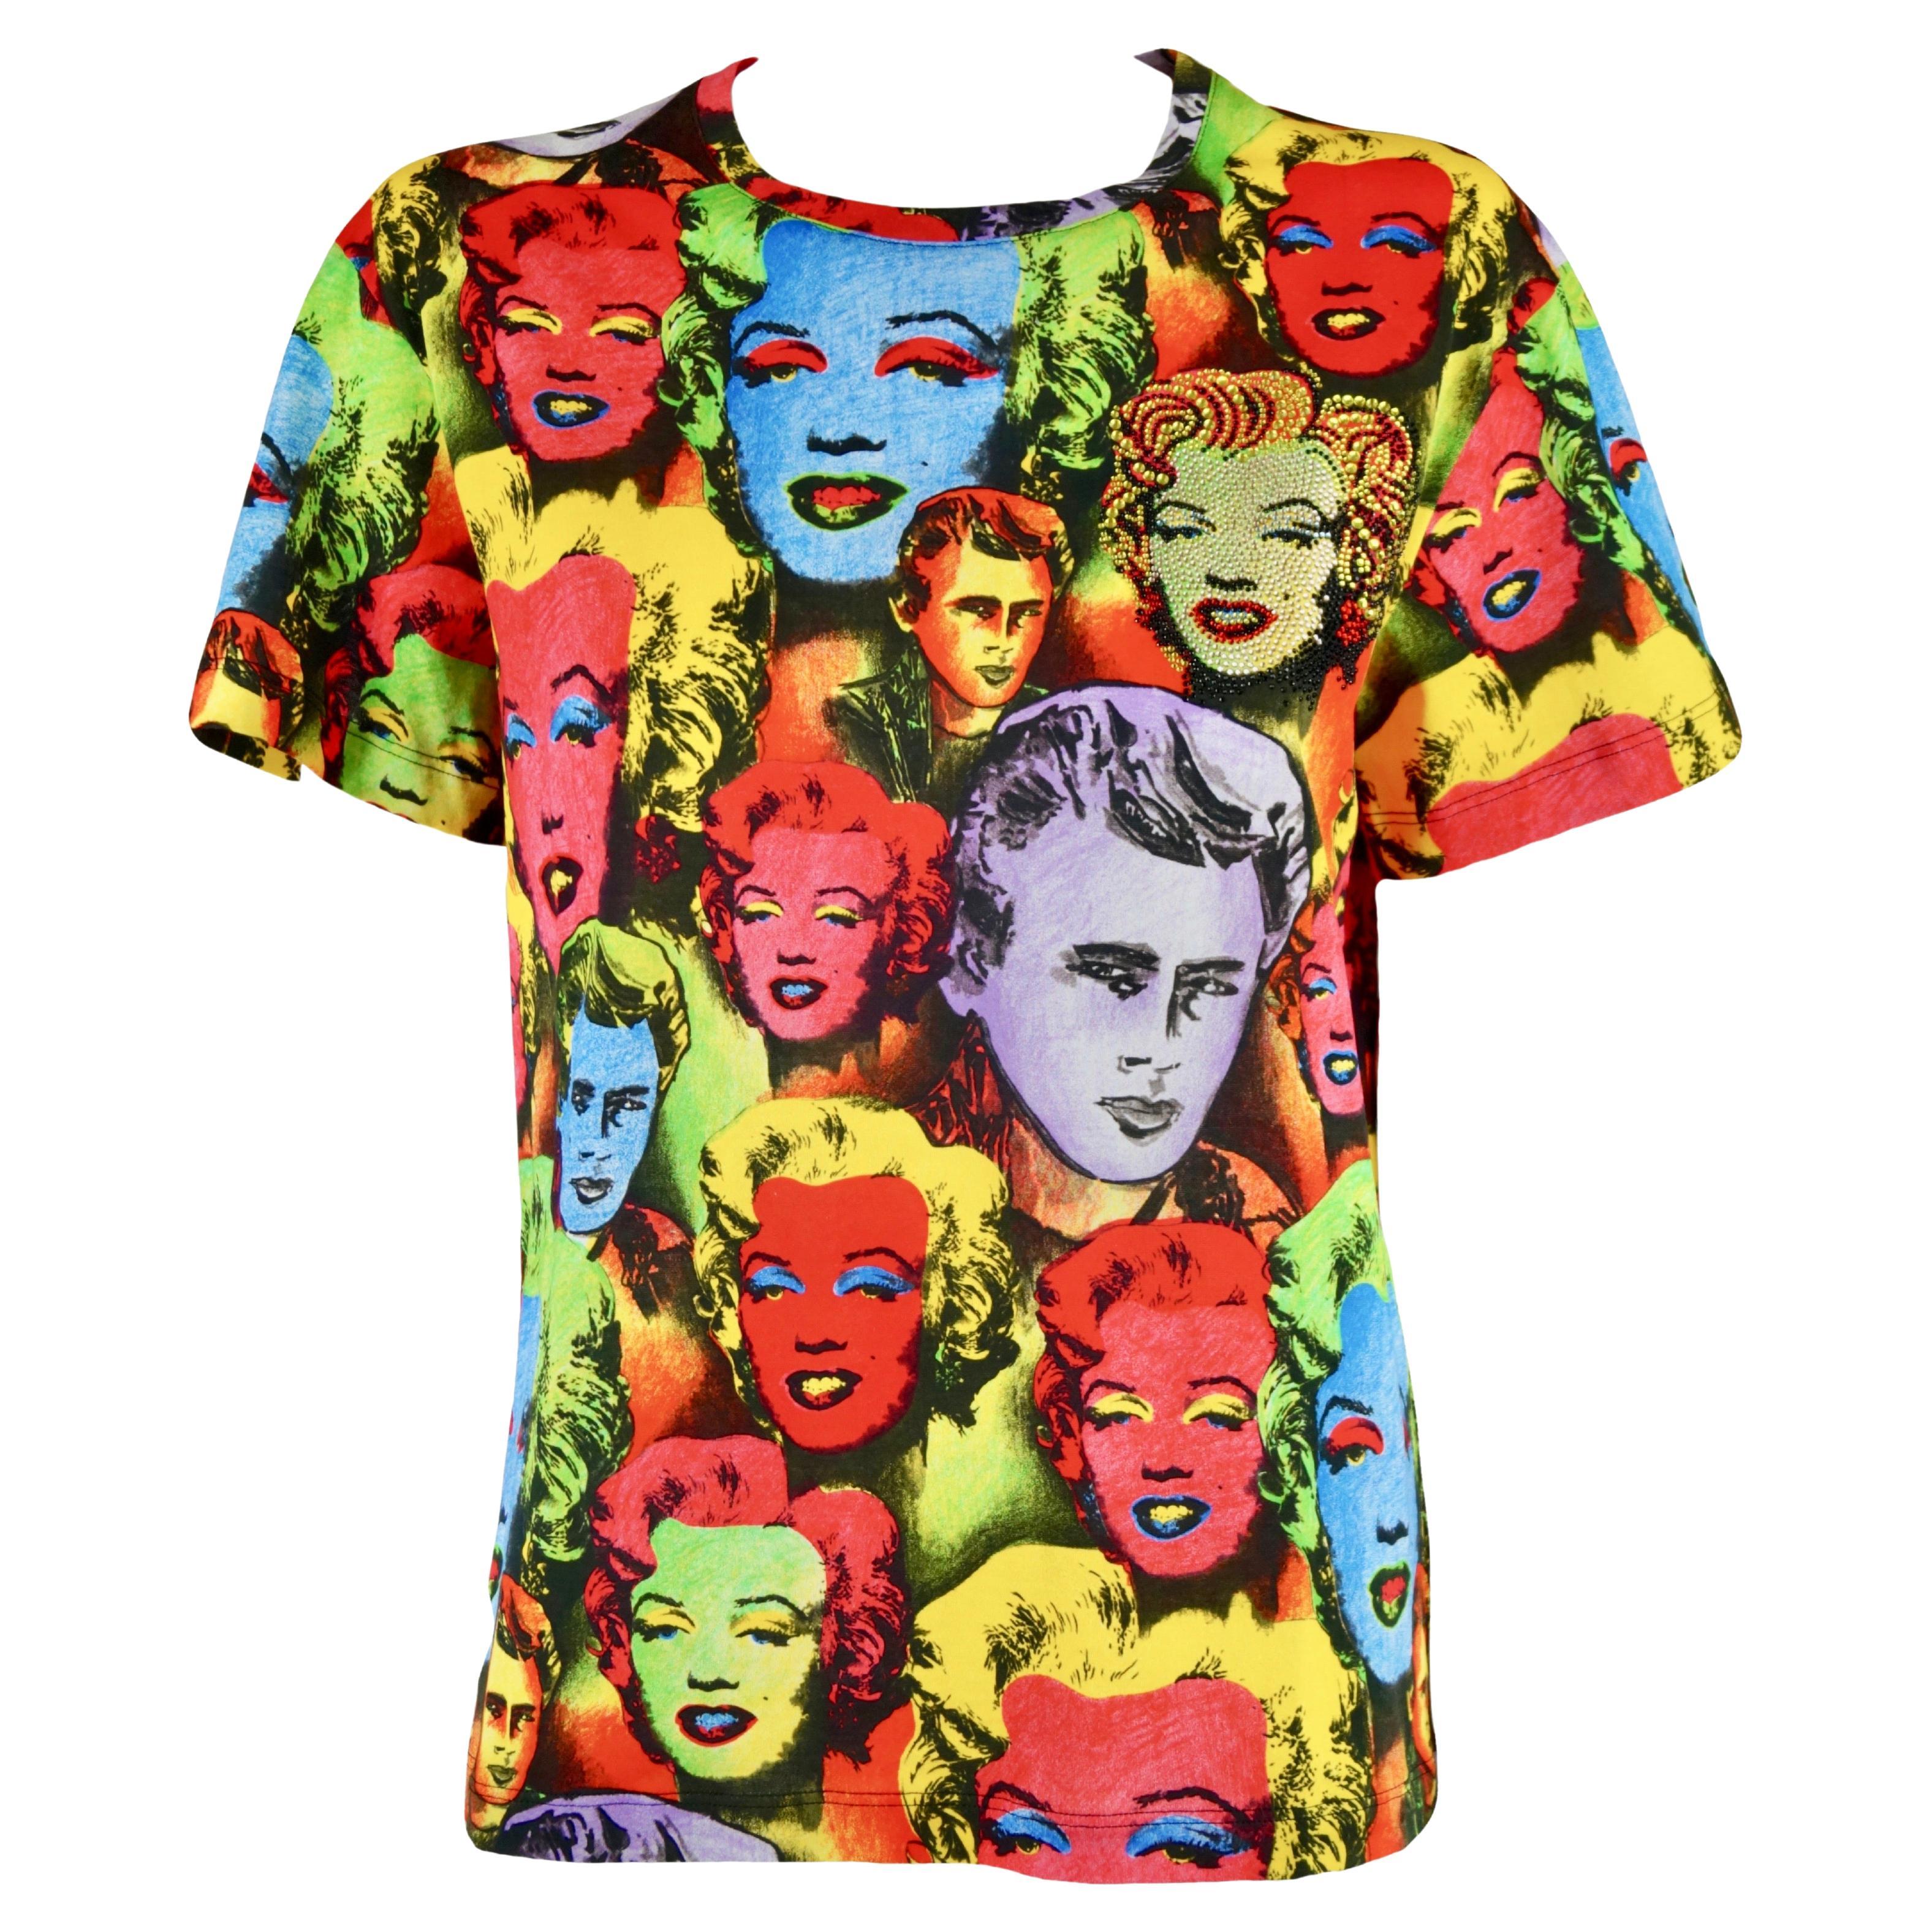 VERSACE Tribute 2017 Warhol SS 1991 Marilyn Monroe and James Dean T-shirt